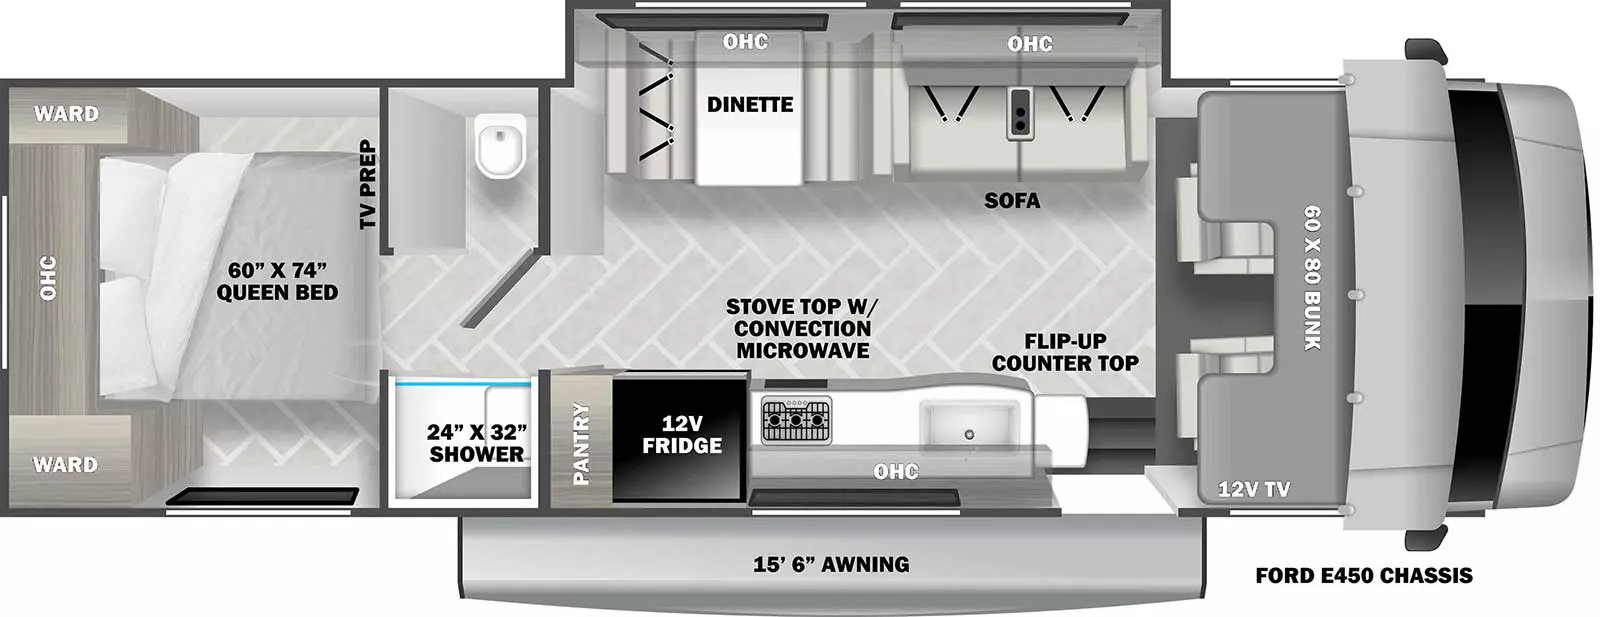 The 2851SLE has 1 slide out on the off-door side. Exterior features include a 15 ft. 6 in. awning and it is built on a Ford E-450 chassis. Interior layout from front to back includes: front 60 x 80 cab over bunk; off-door side slide out holding a dinette, overhead cabinet and sofa; door side kitchen with pantry, 12V refrigerator, stovetop with microwave, sink, overhead cabinet and flip-up countertop extension; walk-through bathroom with toilet and 24 x 32 shower; rear bedroom with foot-facing 60 x 74 Queen bed, overhead cabinet and opposing side eardrobes.